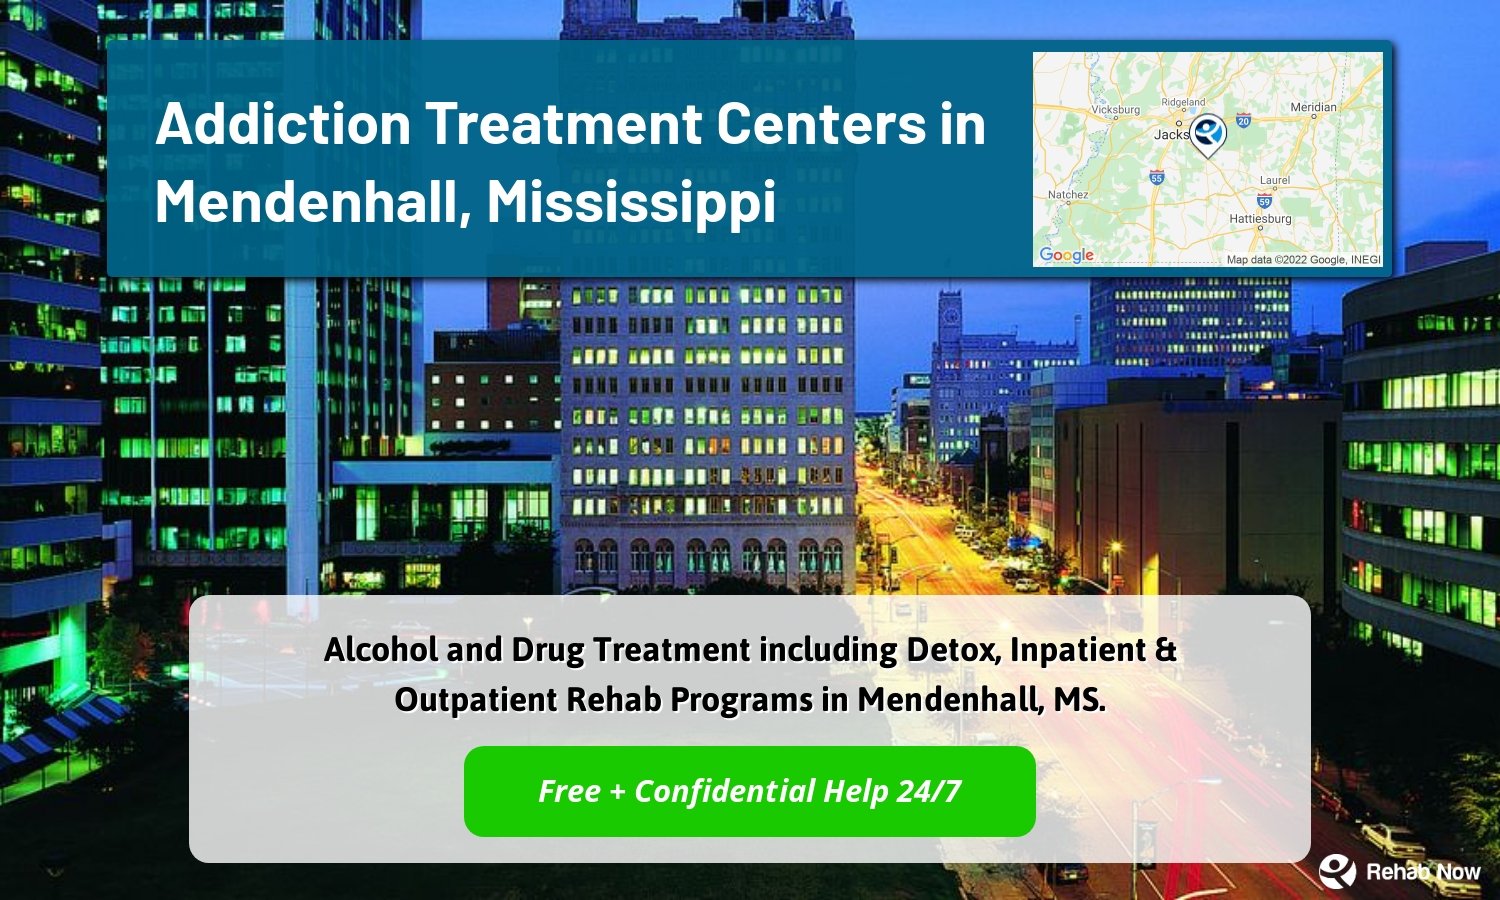 Alcohol and Drug Treatment including Detox, Inpatient & Outpatient Rehab Programs in Mendenhall, MS.